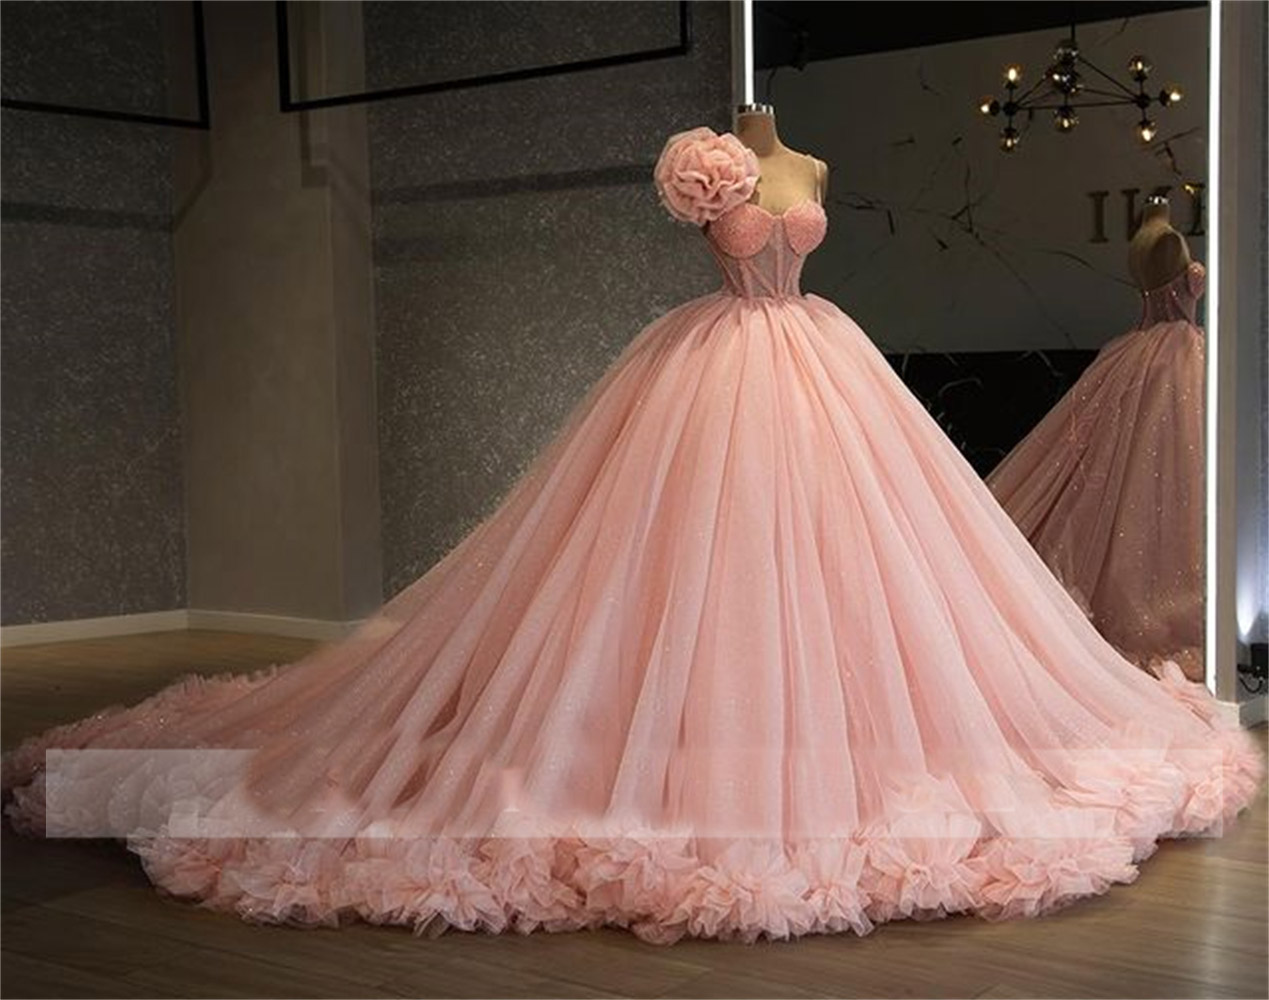 Pink Prom Dresses, Quinceanera Dress, Princess Corest Prom Dresses, Ball Gown Evening Dresses, Hand Made Flowers Evening Dresses, Puffy Prom